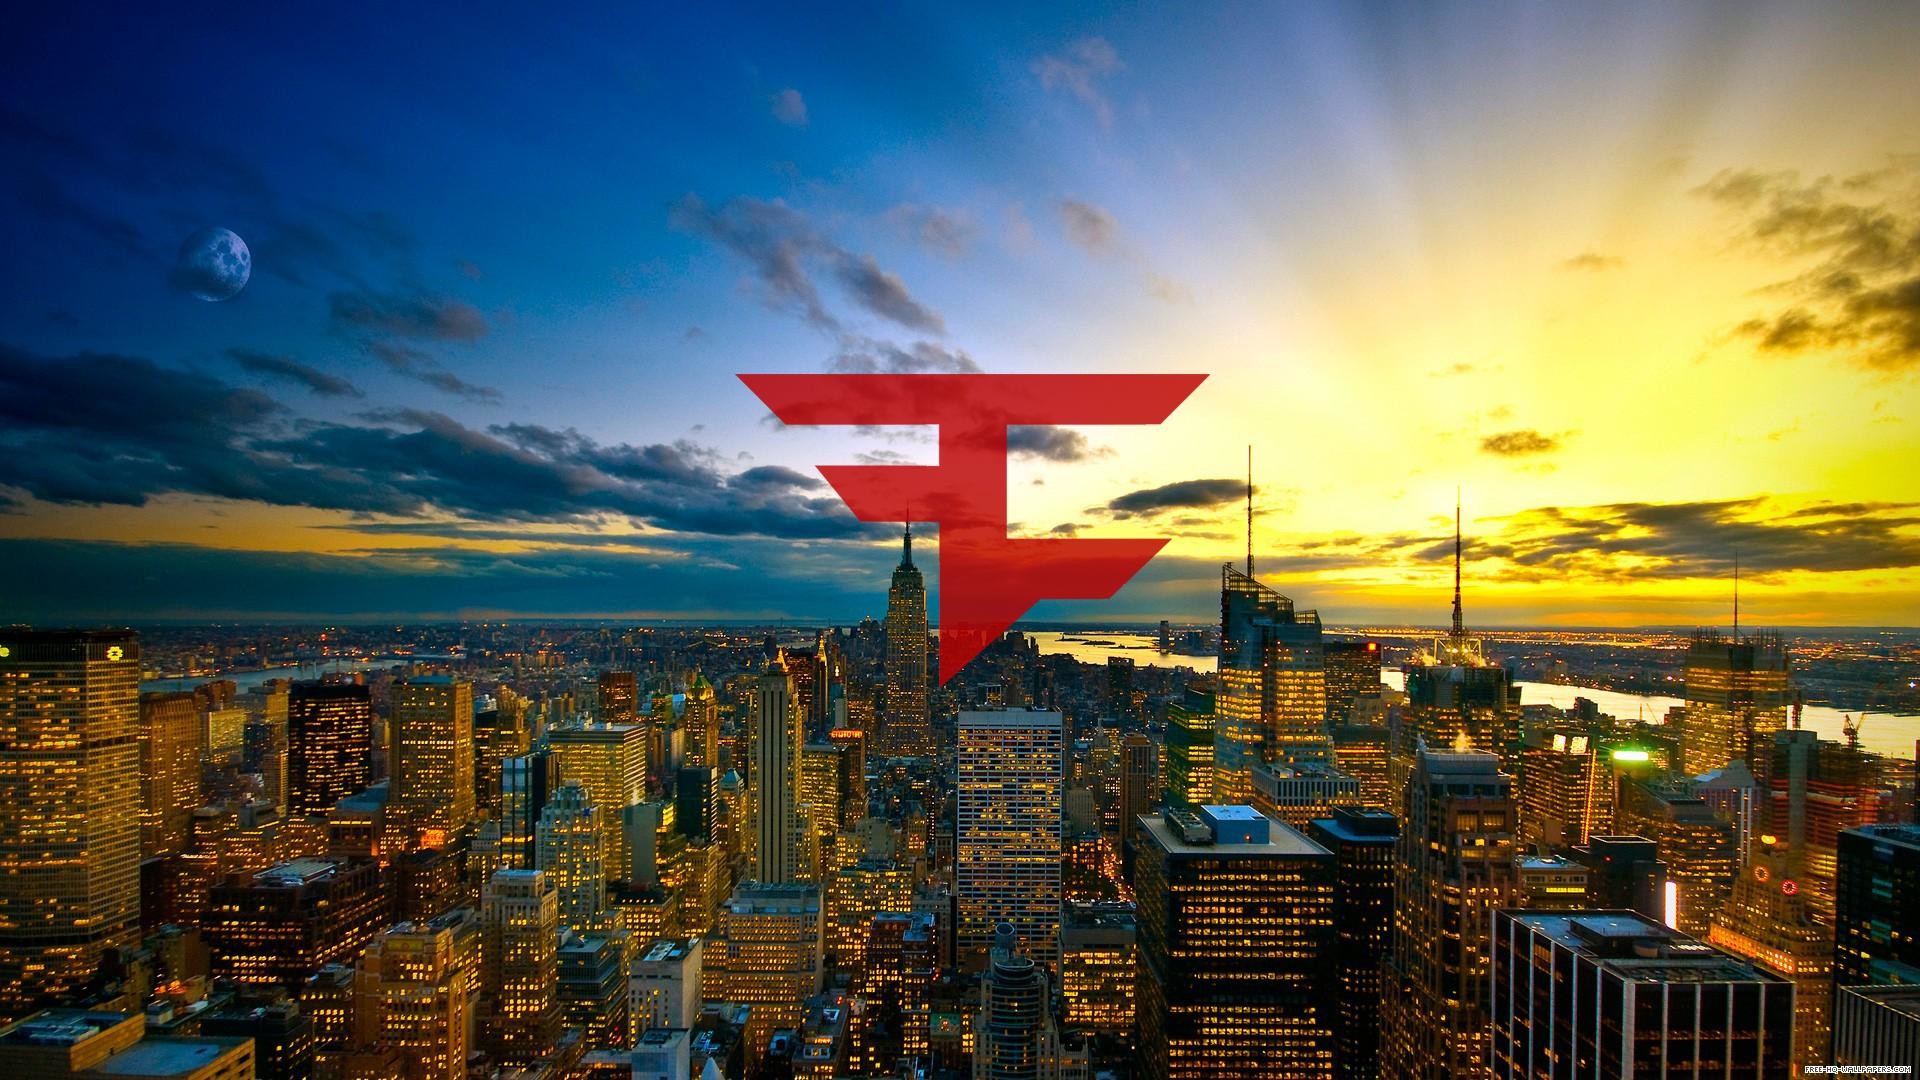 1920x1080 0  A FaZe I done wallpaper wp4401888  Competitive Team  Wallpapers CoDCompetitive